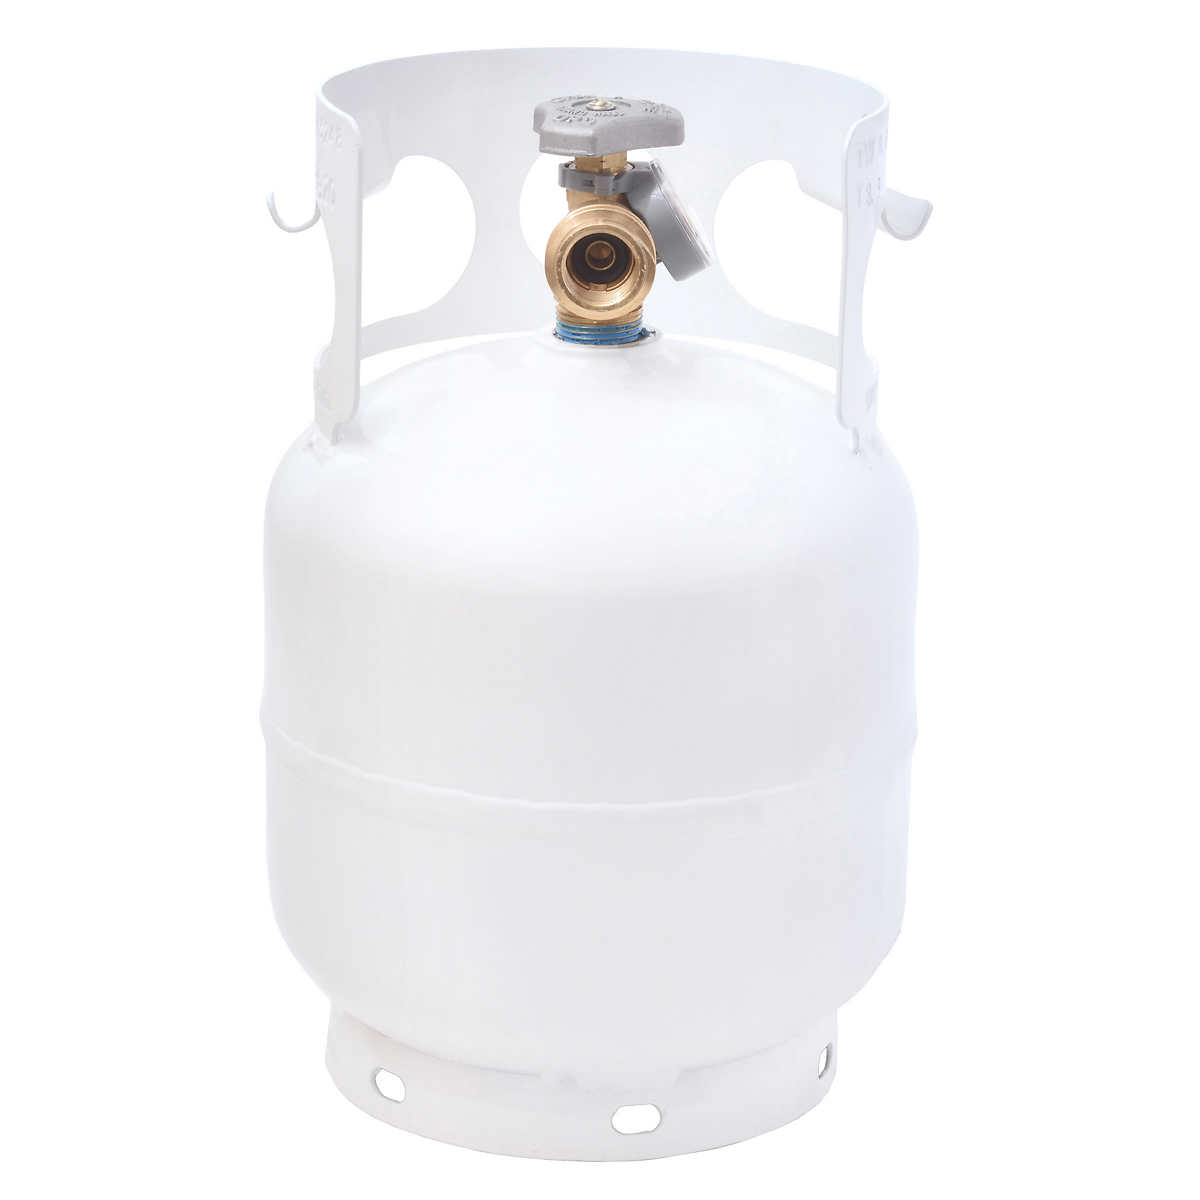 7L Fuel Oil Gasoline Tank,MoreChioce Oil Gasoline Liquid Petrol Plastic  Storge Canister Water Tank Fuel Tank Assembly for Boat Car Truck Parking